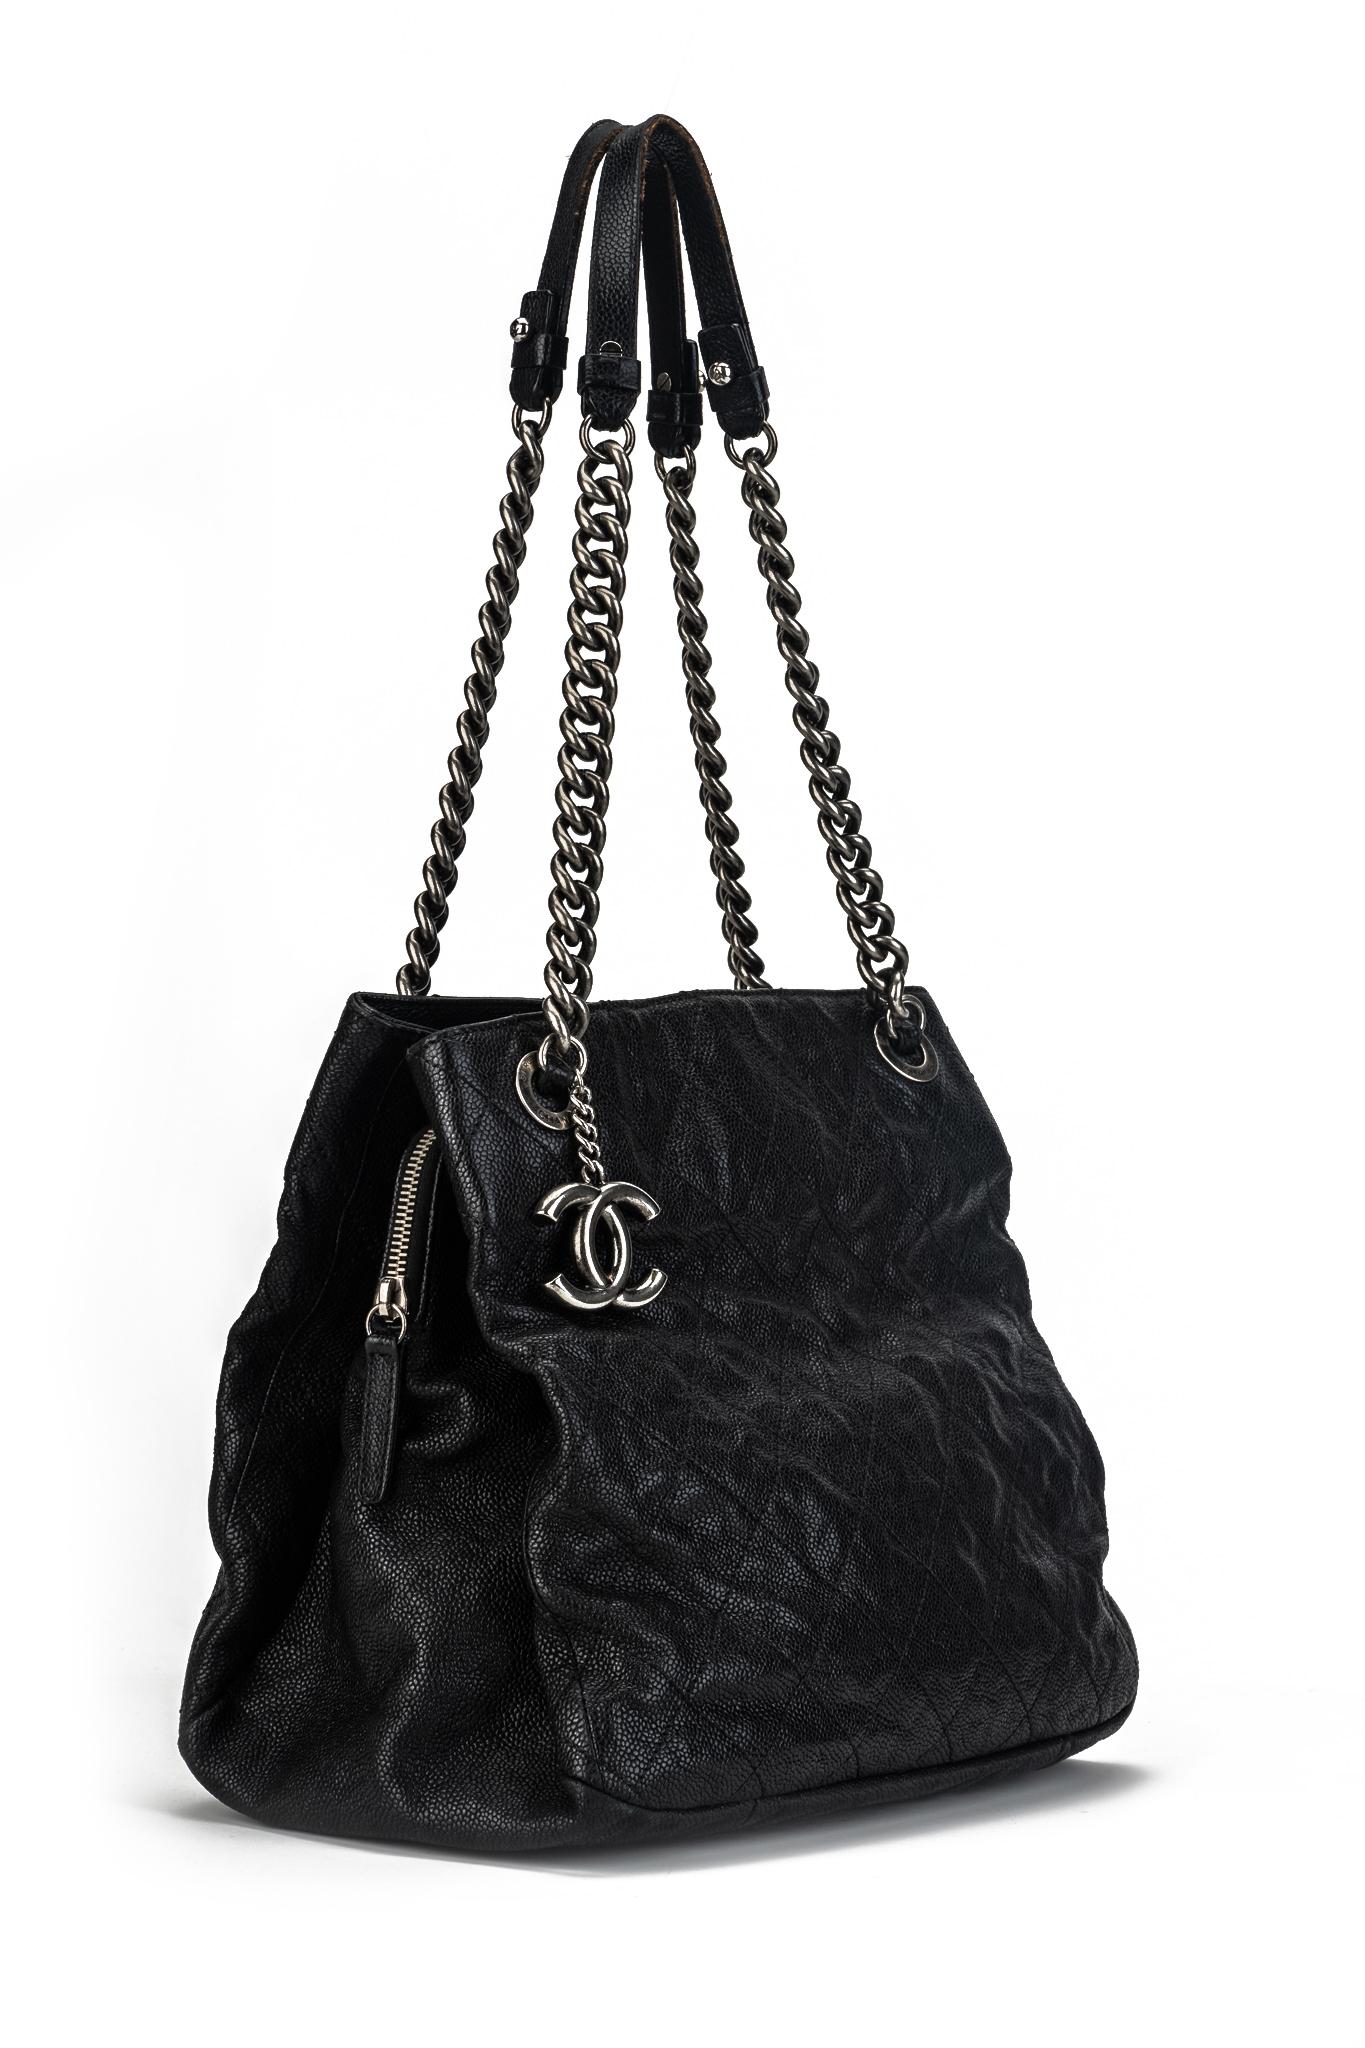 Chanel Black Caviar 3 Compartments Bag In Good Condition For Sale In West Hollywood, CA